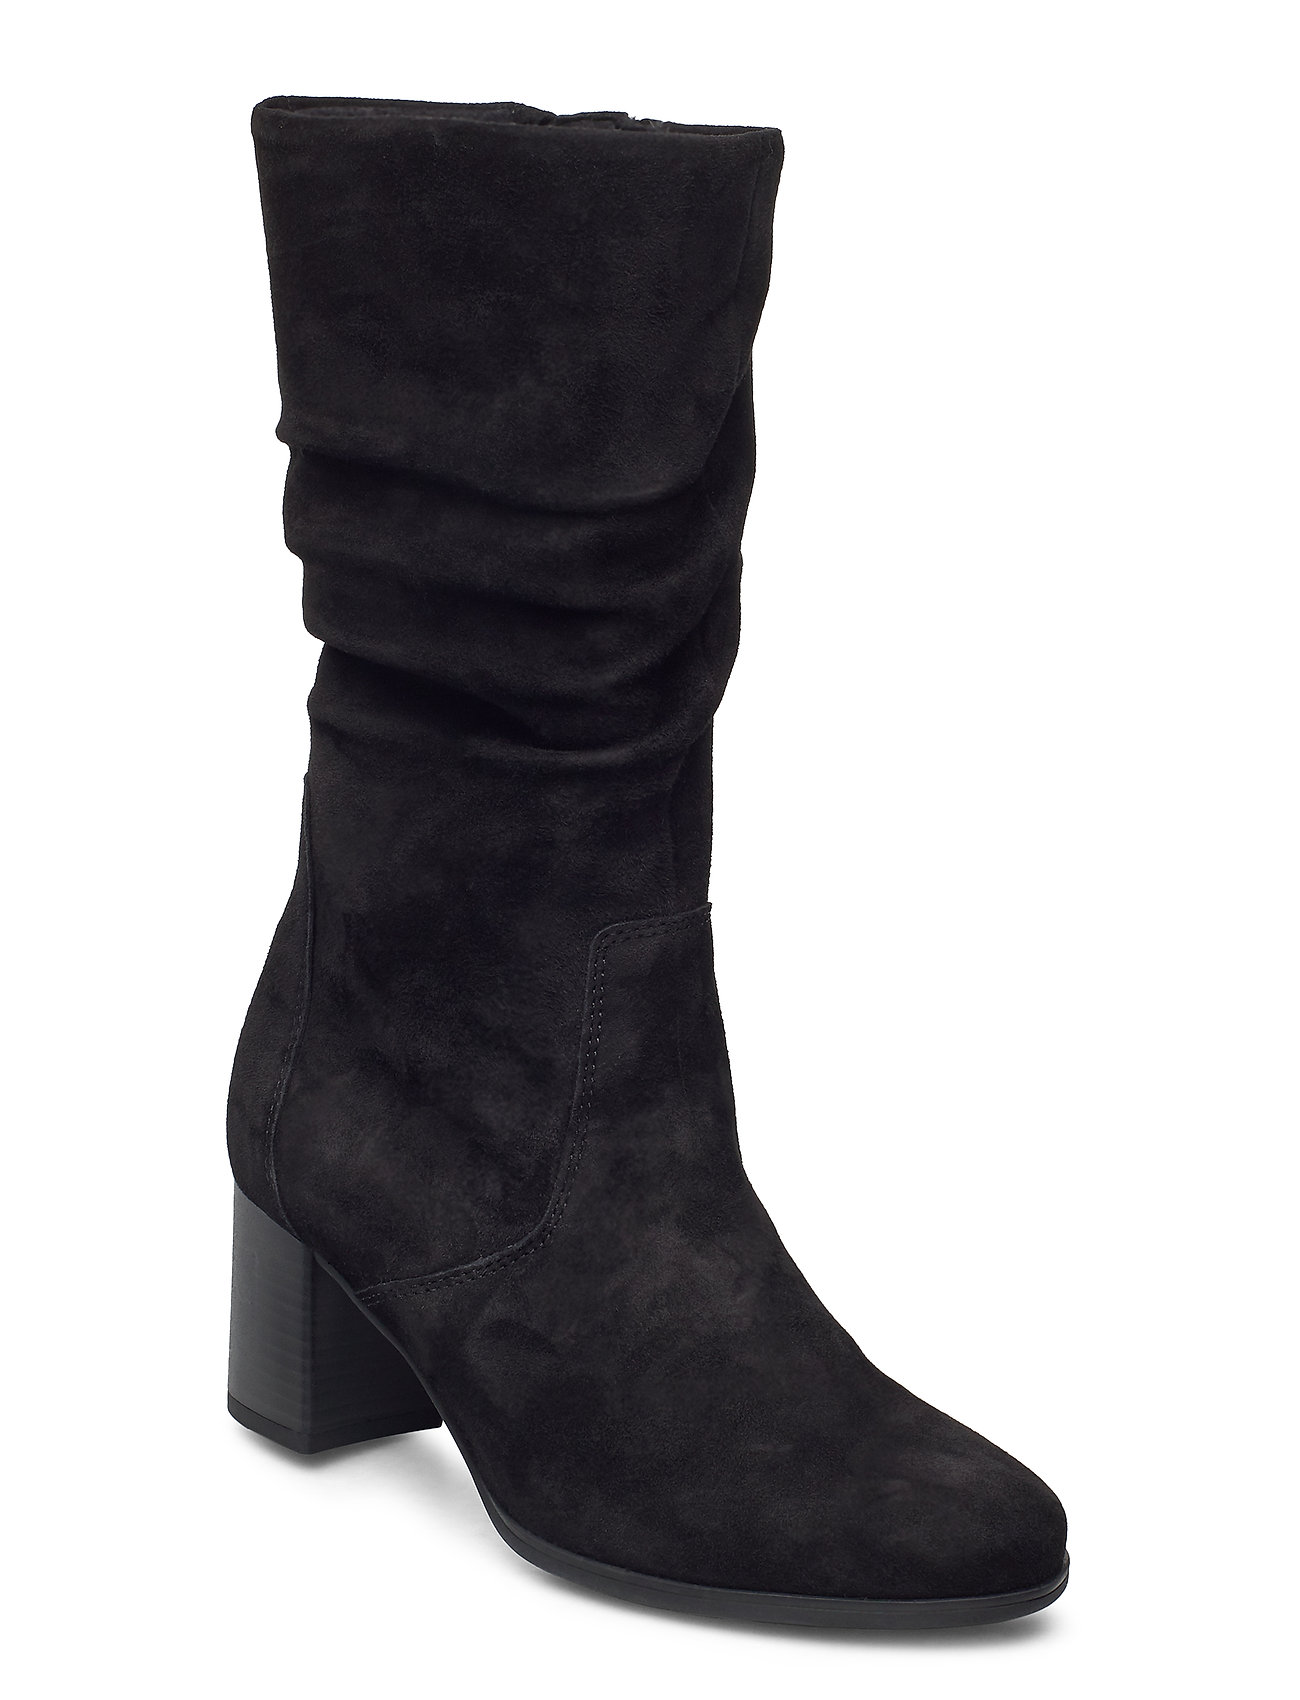 Sort Boot Shoes Boots Ankle Boots Ankle Boot - Heel Sort Gabor for - Pashion.dk